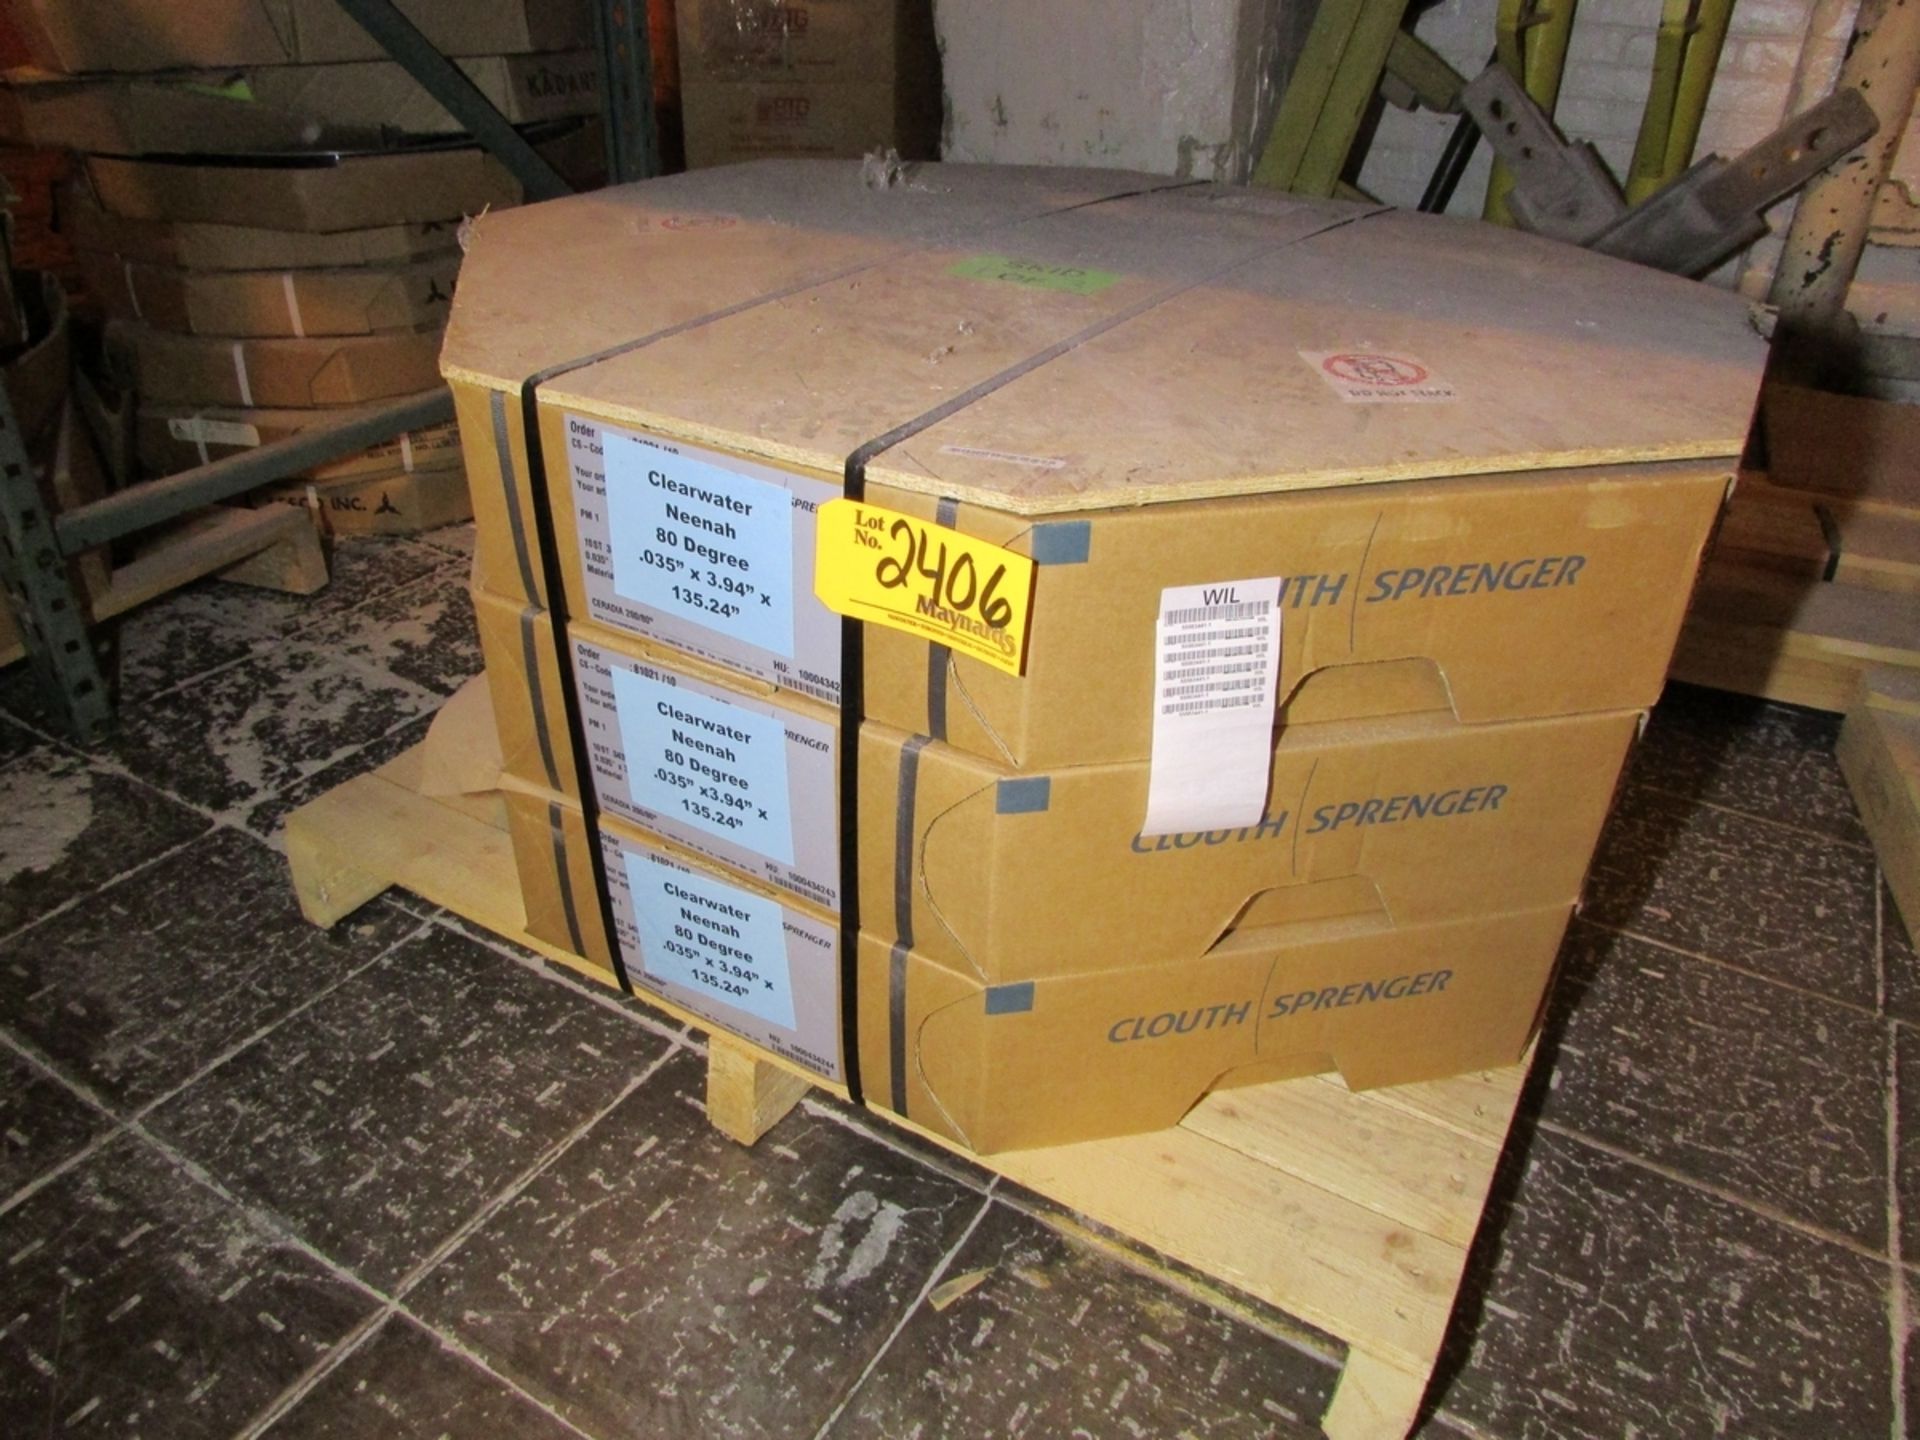 Clouth Sprenger Ceradia 200 80 Boxes of 0.035" x 3.94" x 135.24" Creping Blades